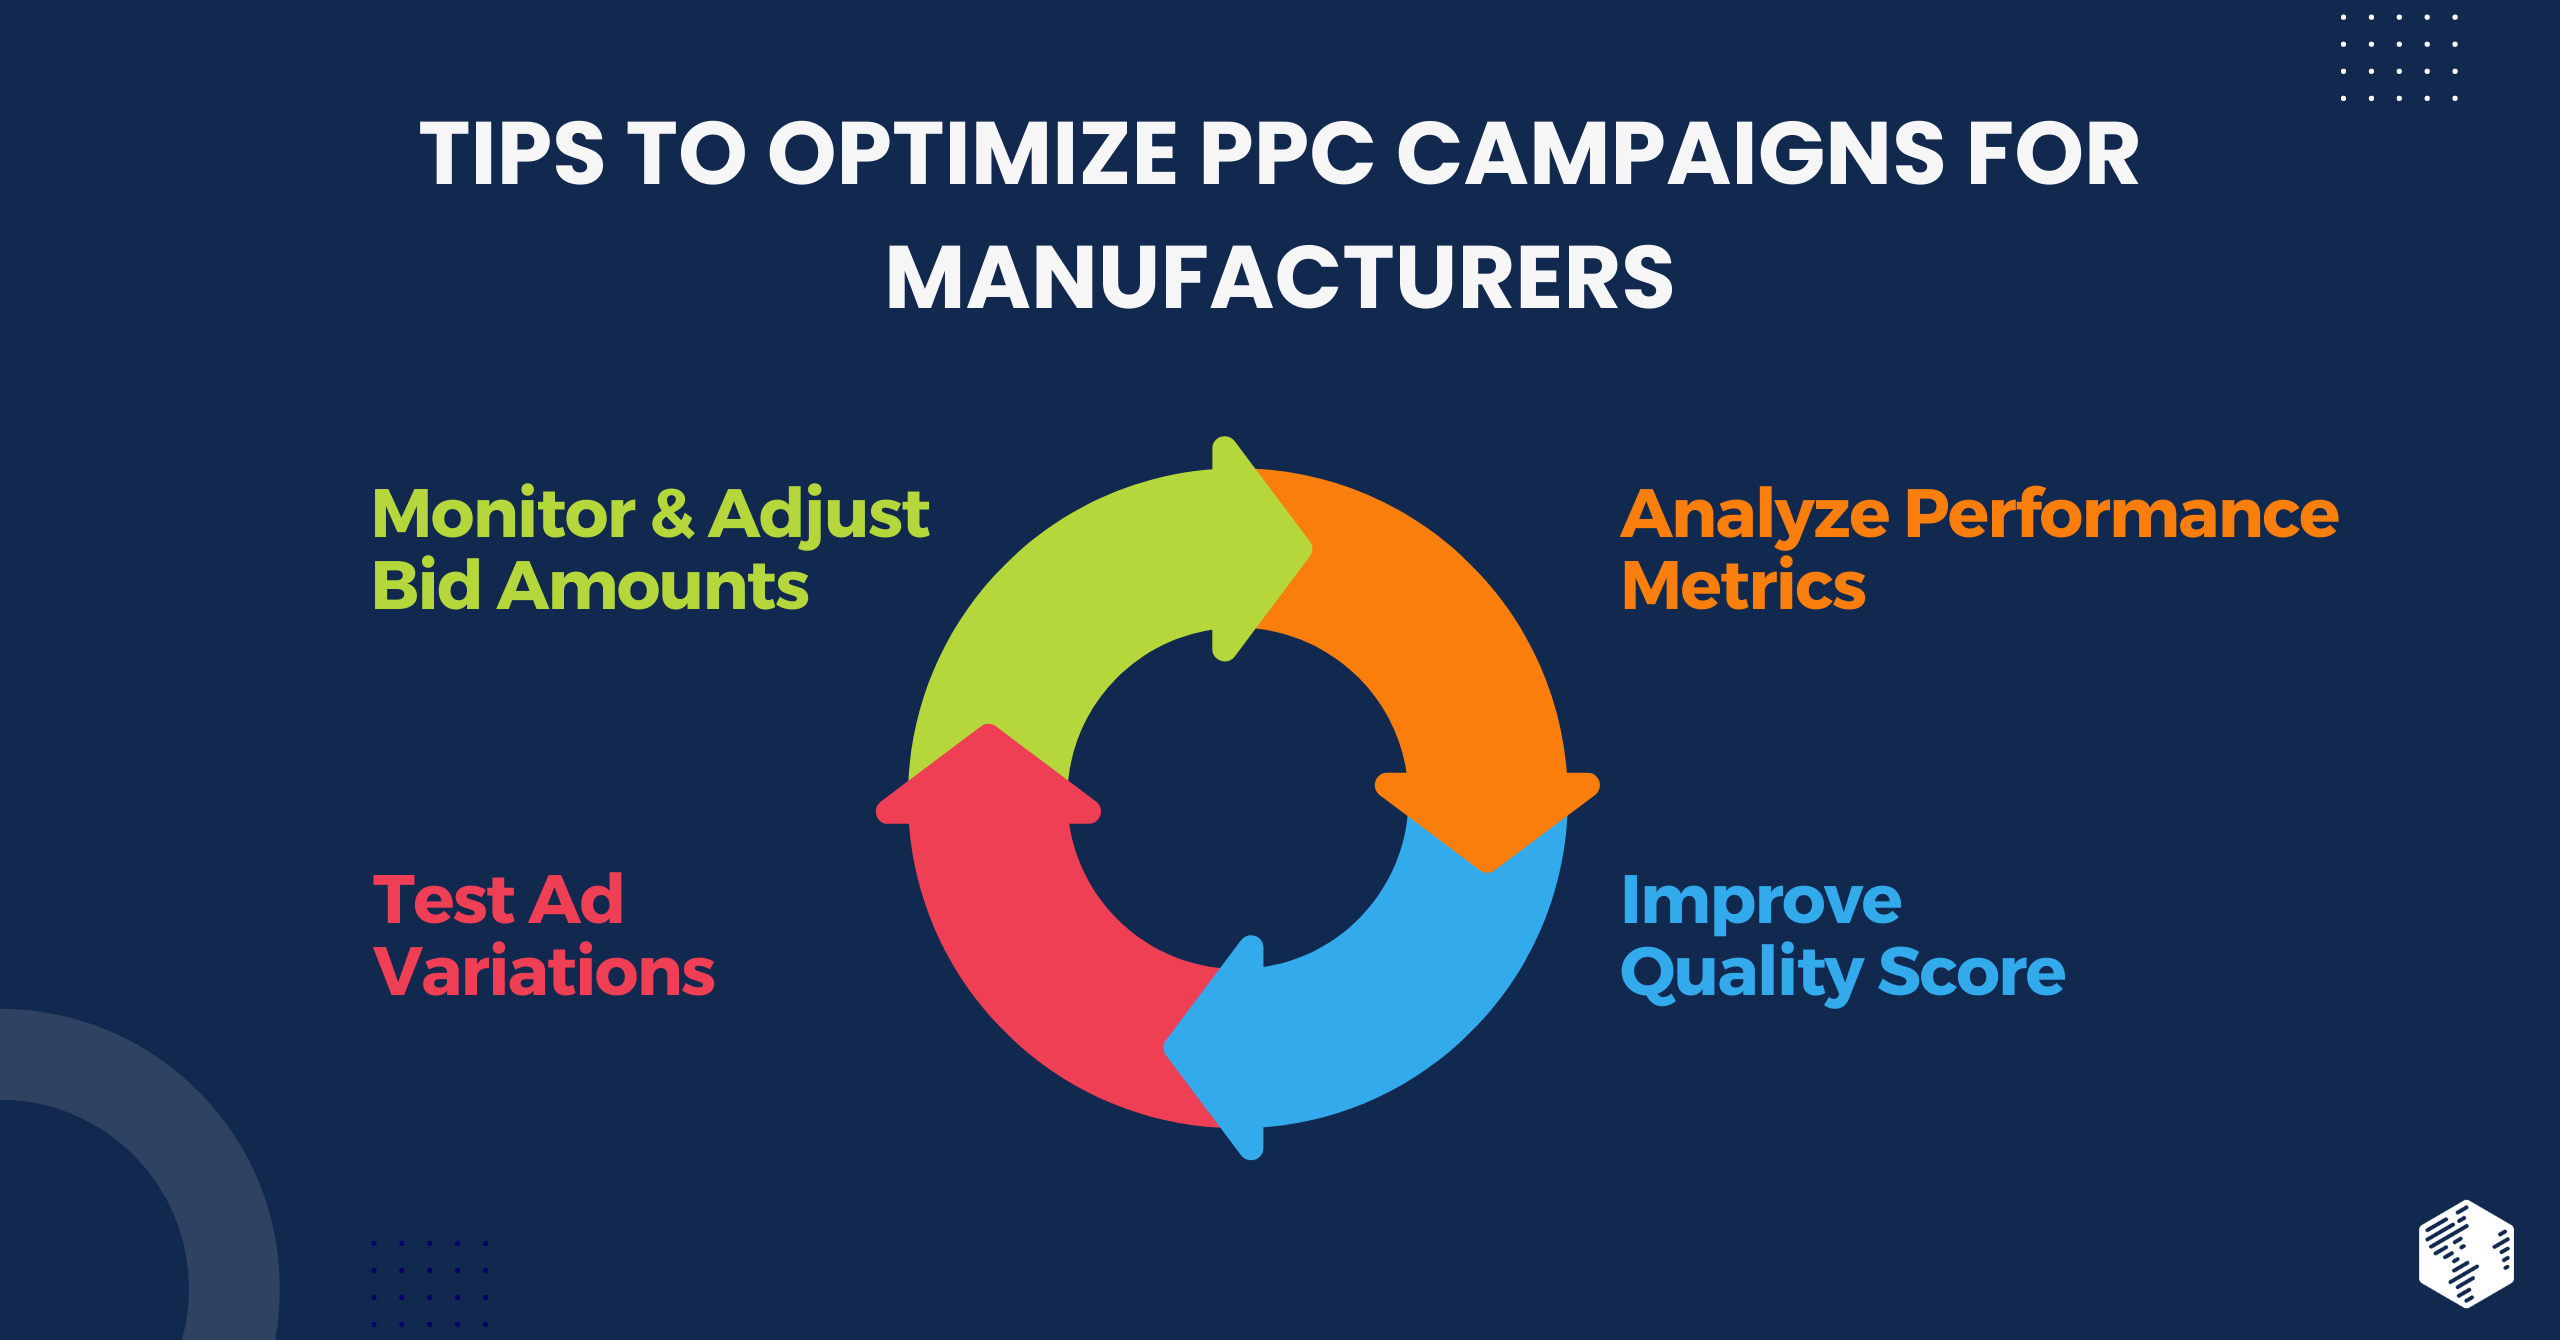 Tips to Optimize PPC Campaigns for Manufacturers